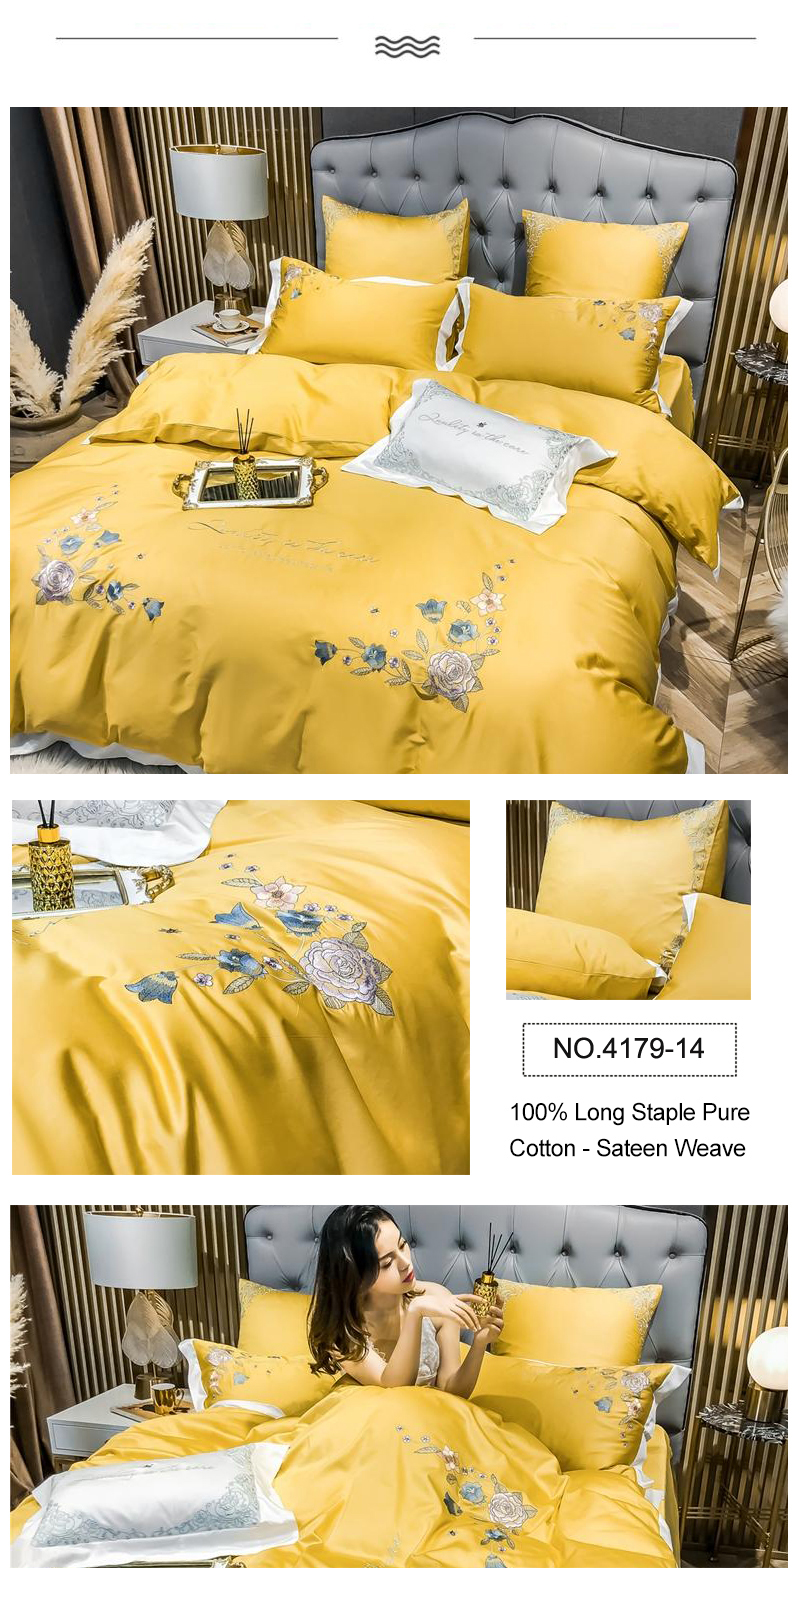 Home Decoration Bedding With LOGO